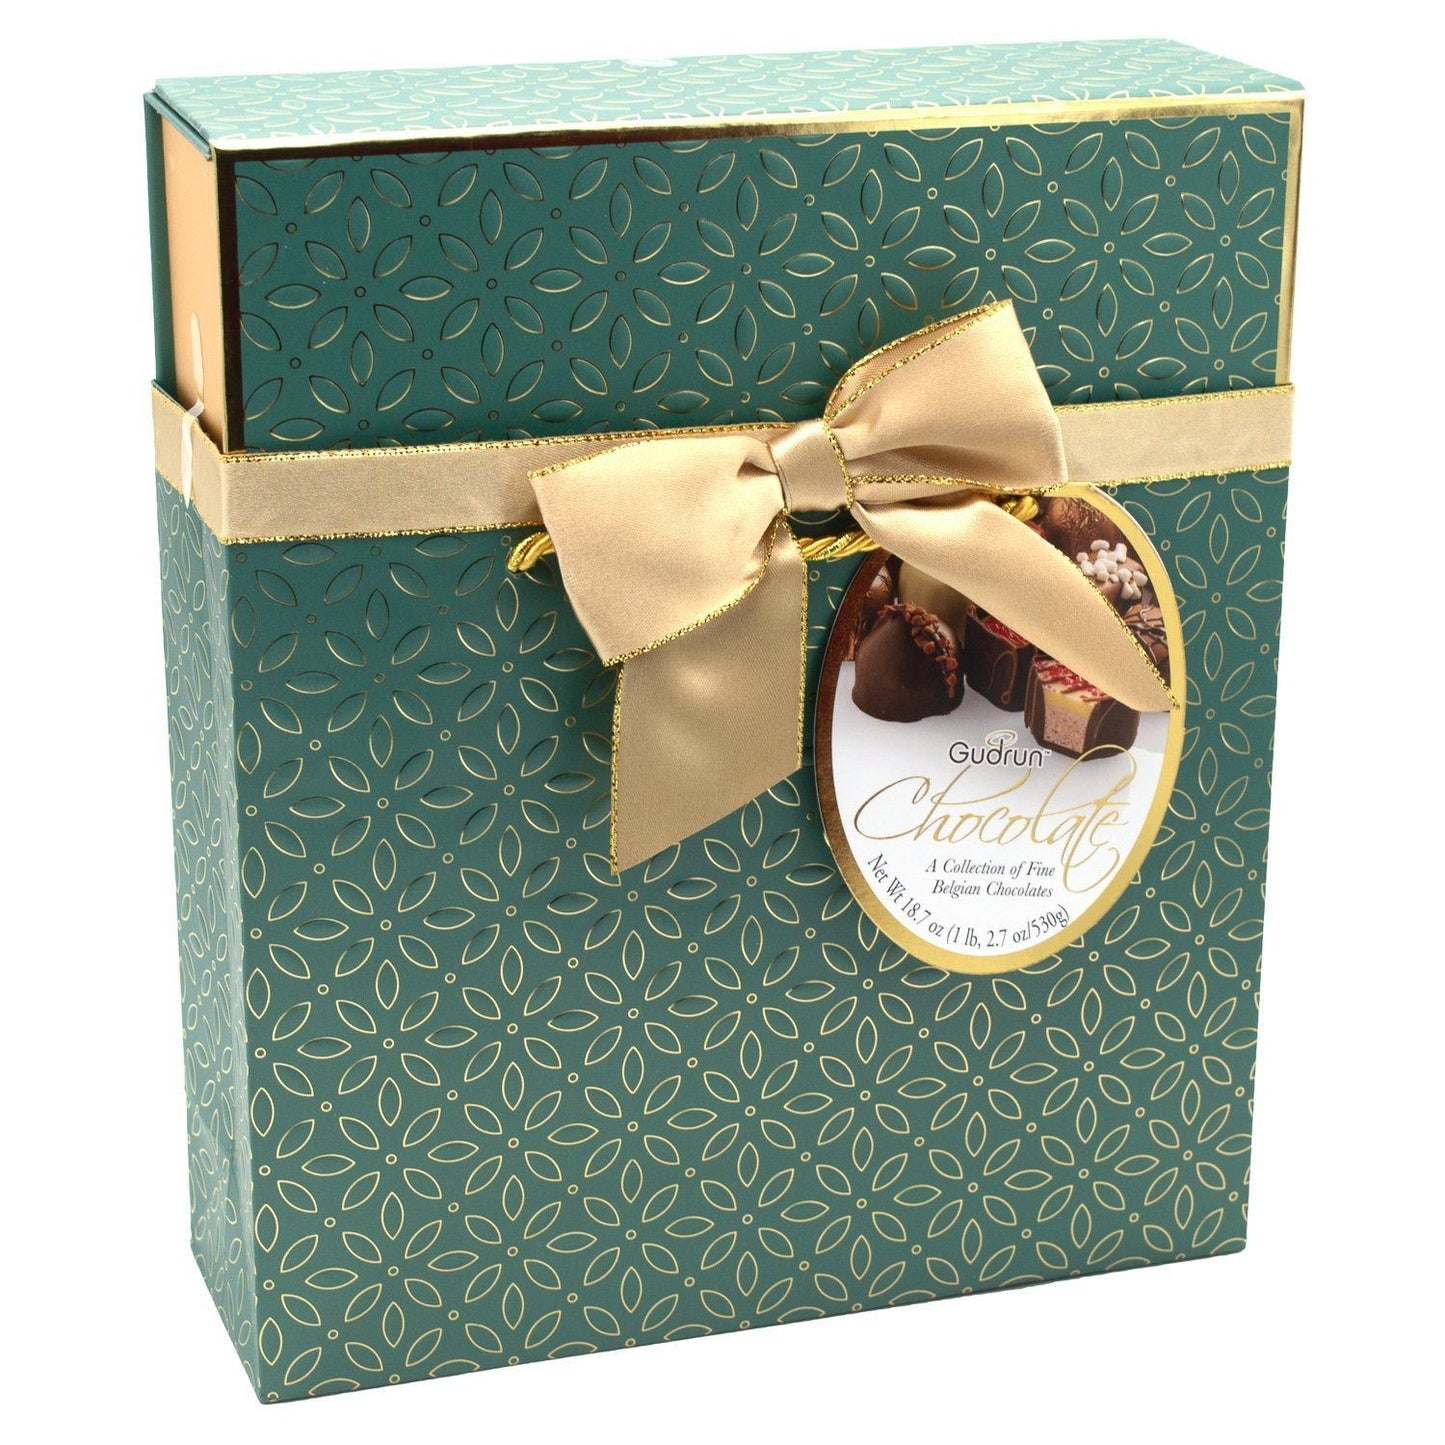 Gudrun Collection of Fine Belgian Chocolates Best Gift this Holidays - Green Box